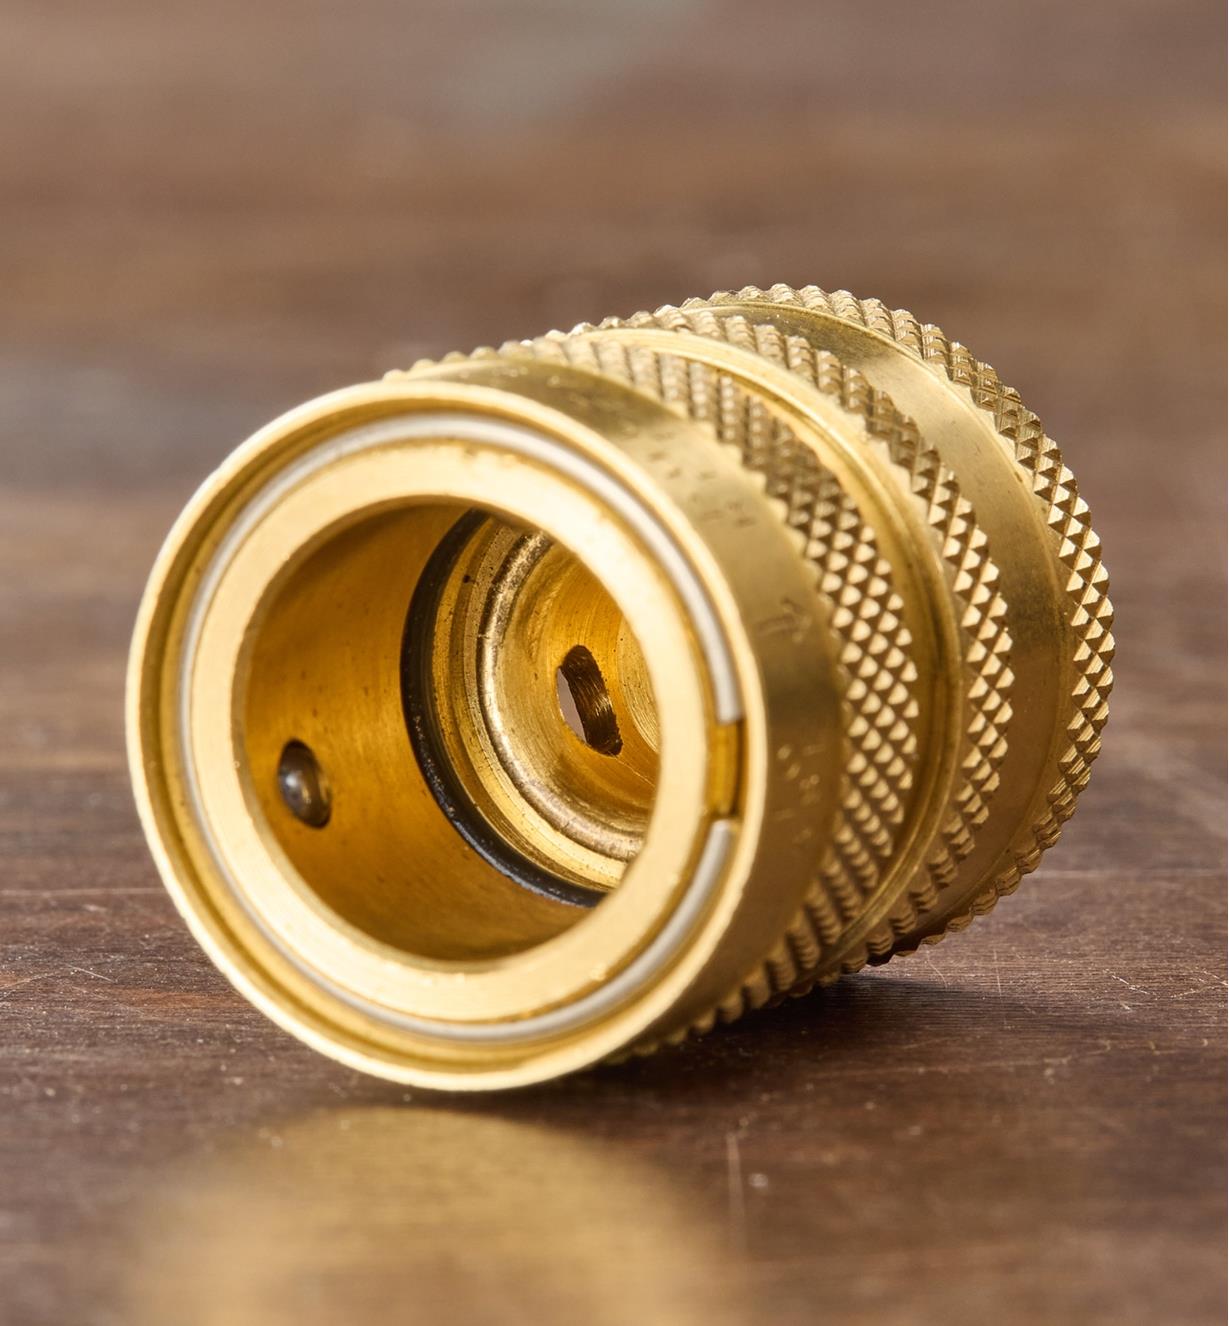 A female brass coupler sits on a wood surface